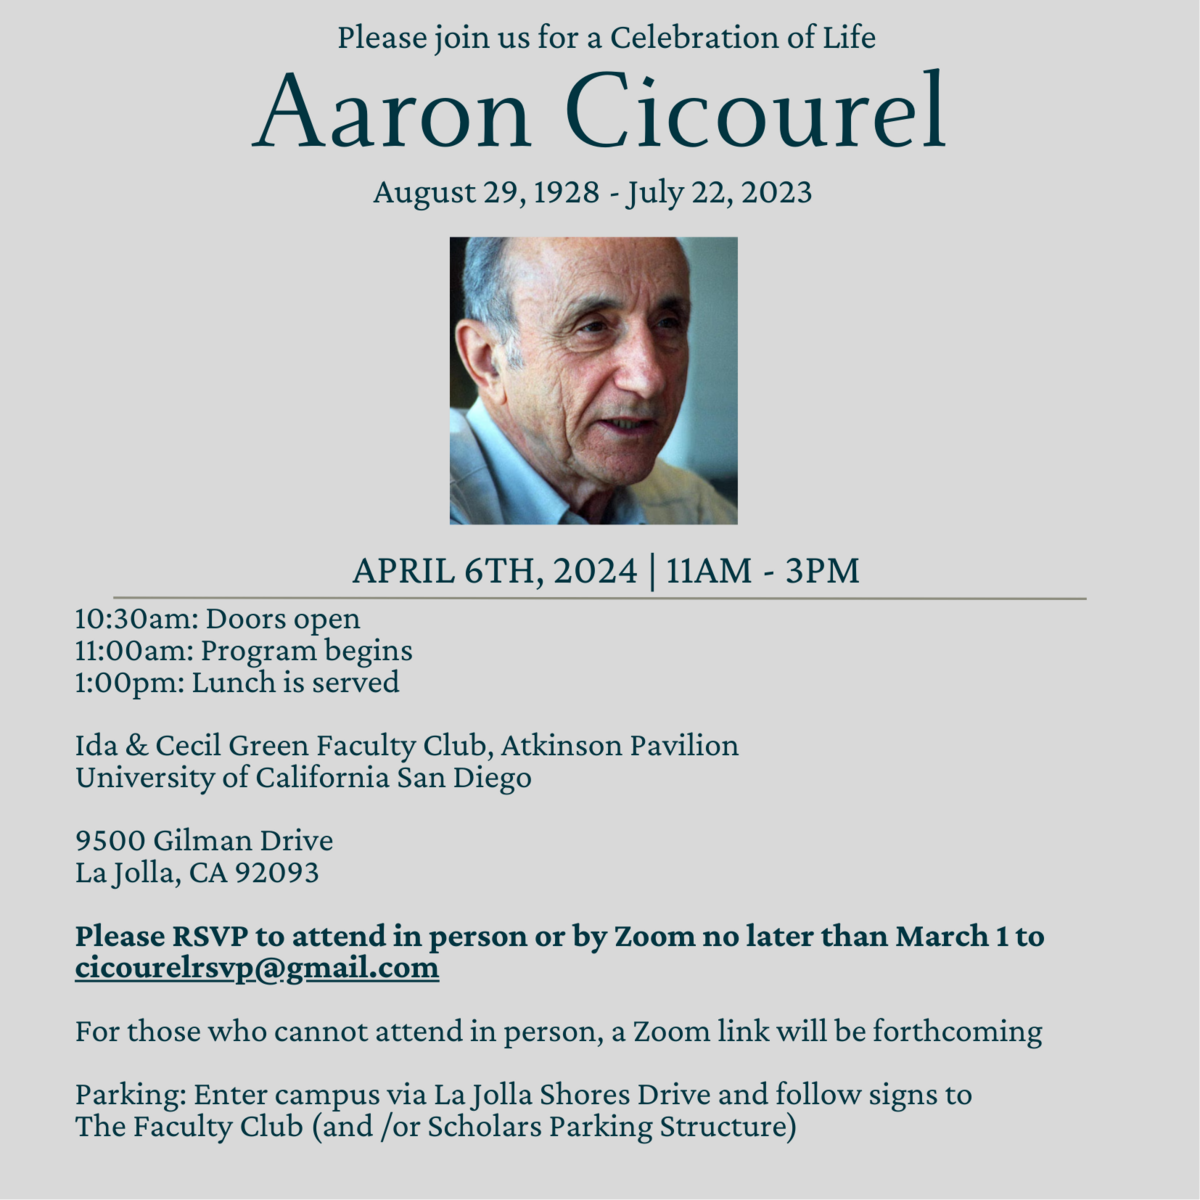 A photo of Aaron Cicourel with text about the memorial that is included in the website